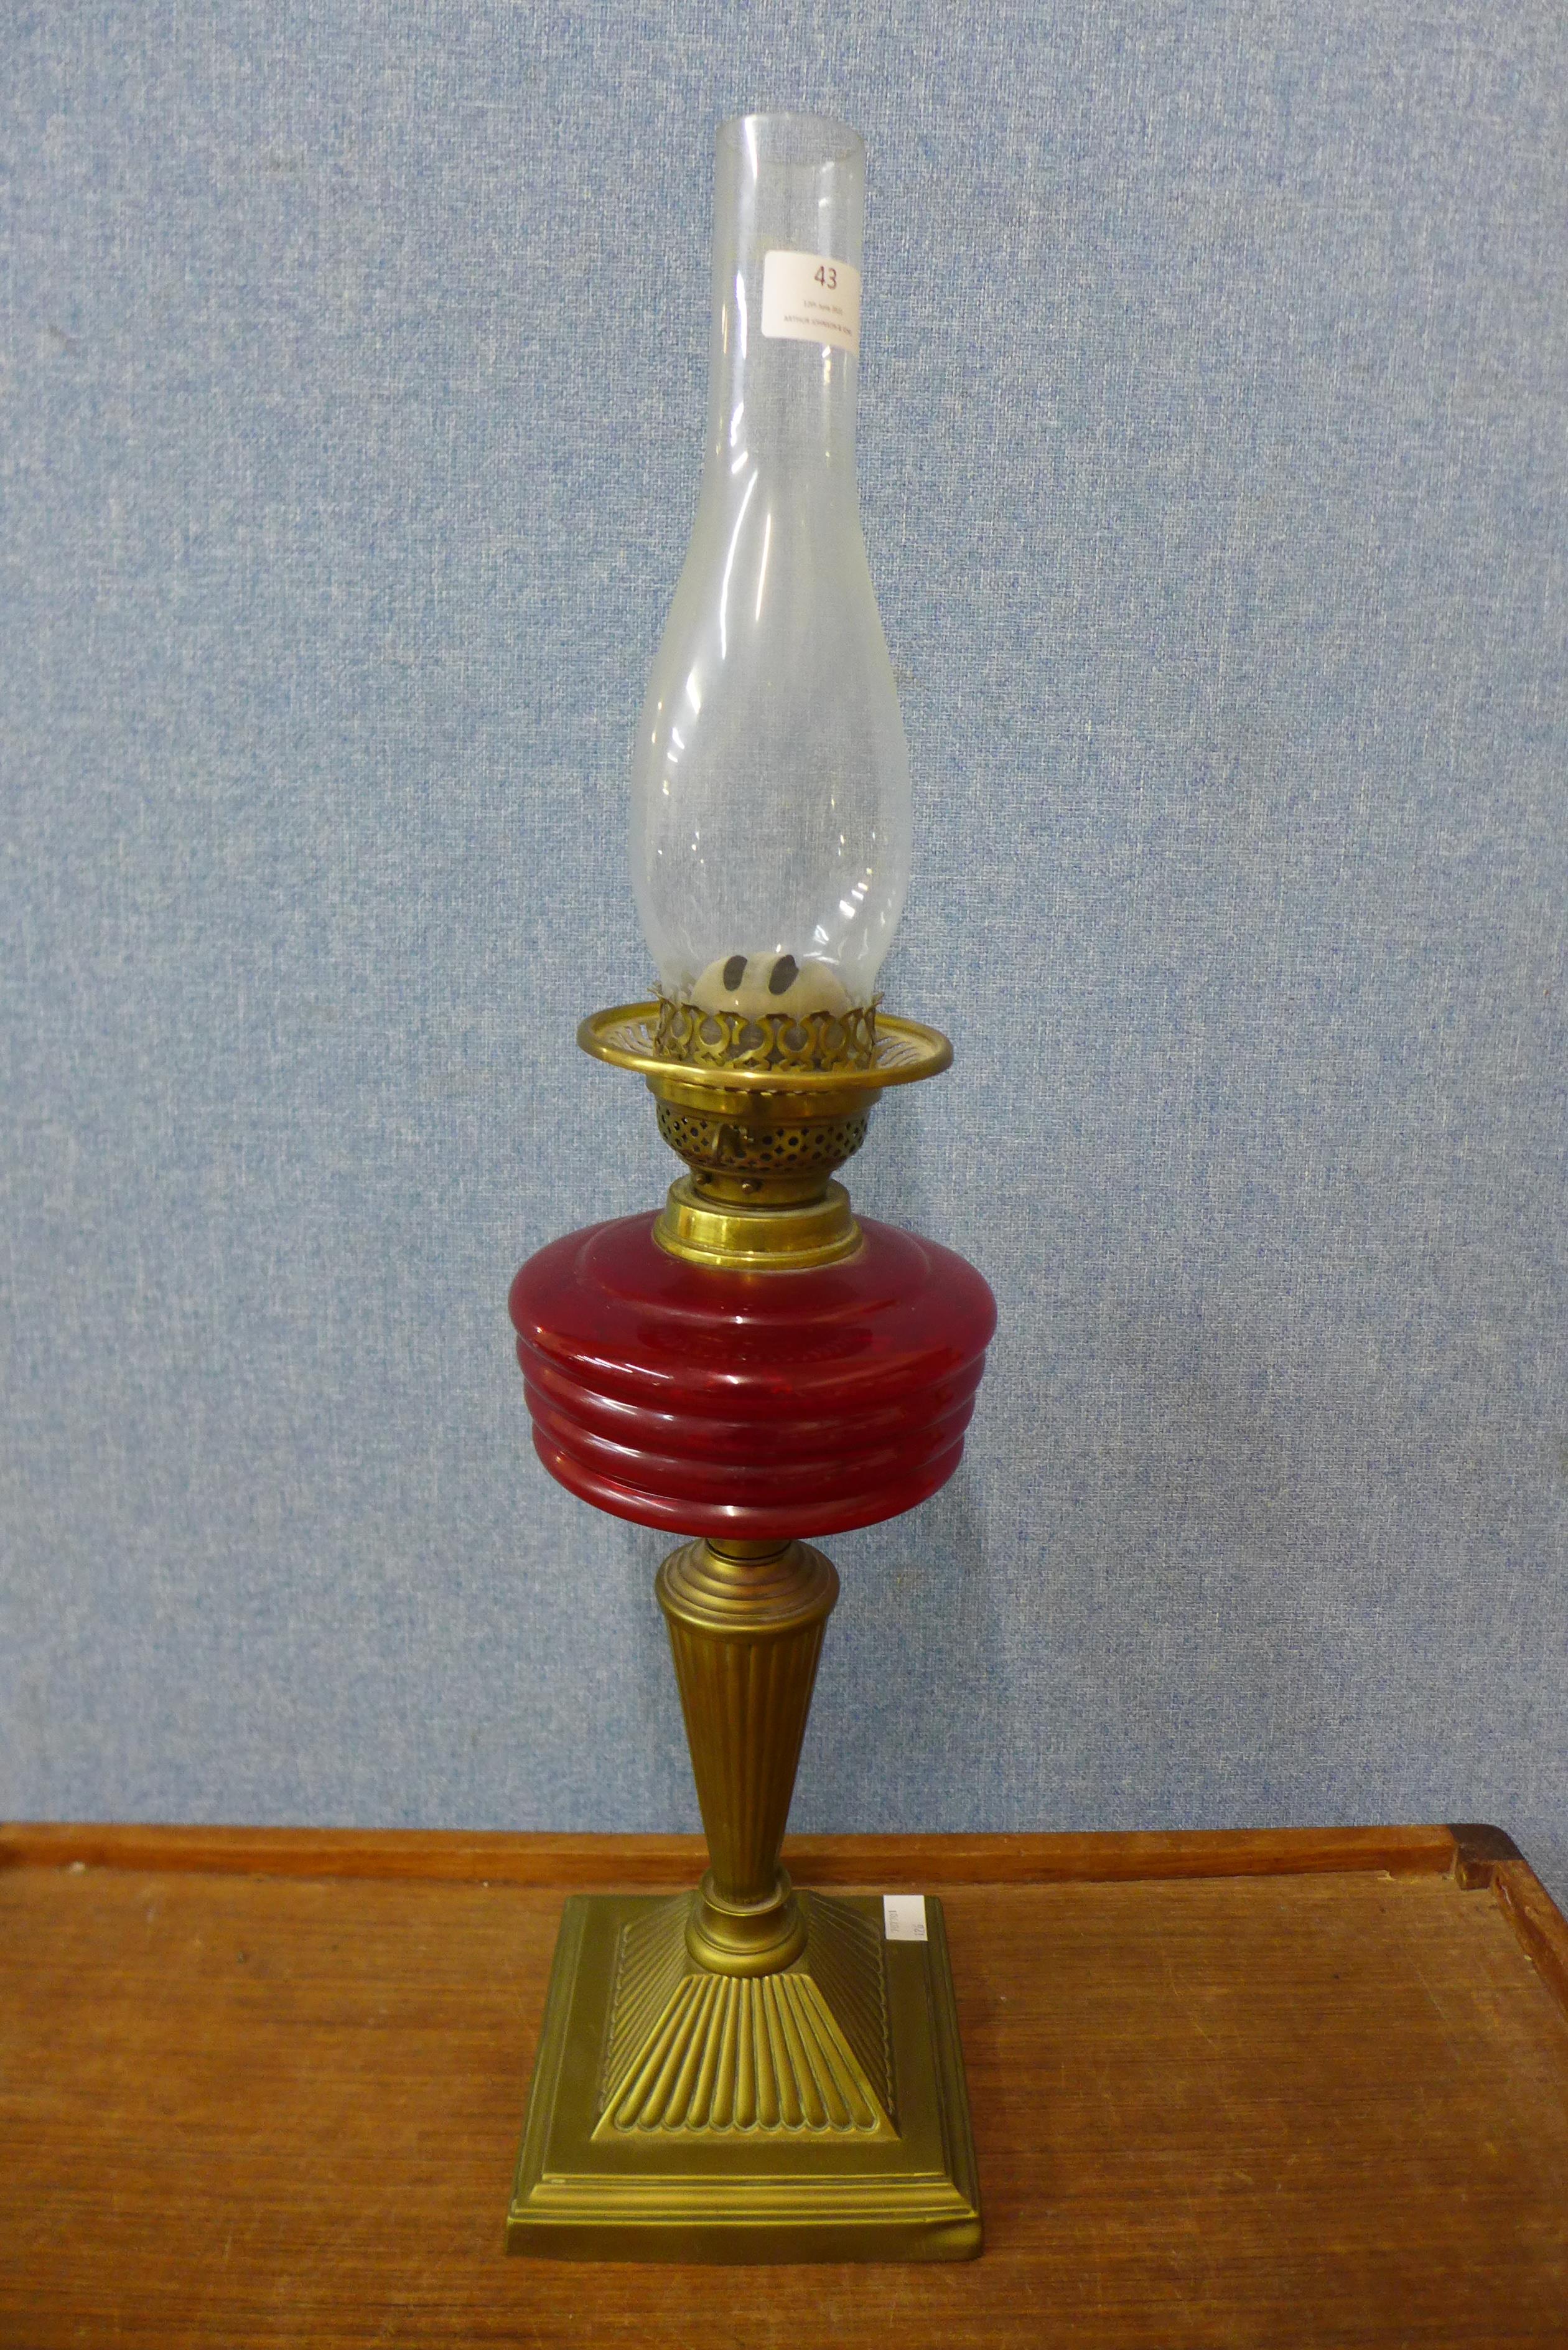 A Victorian brass oil lamp, with red glass reservoir